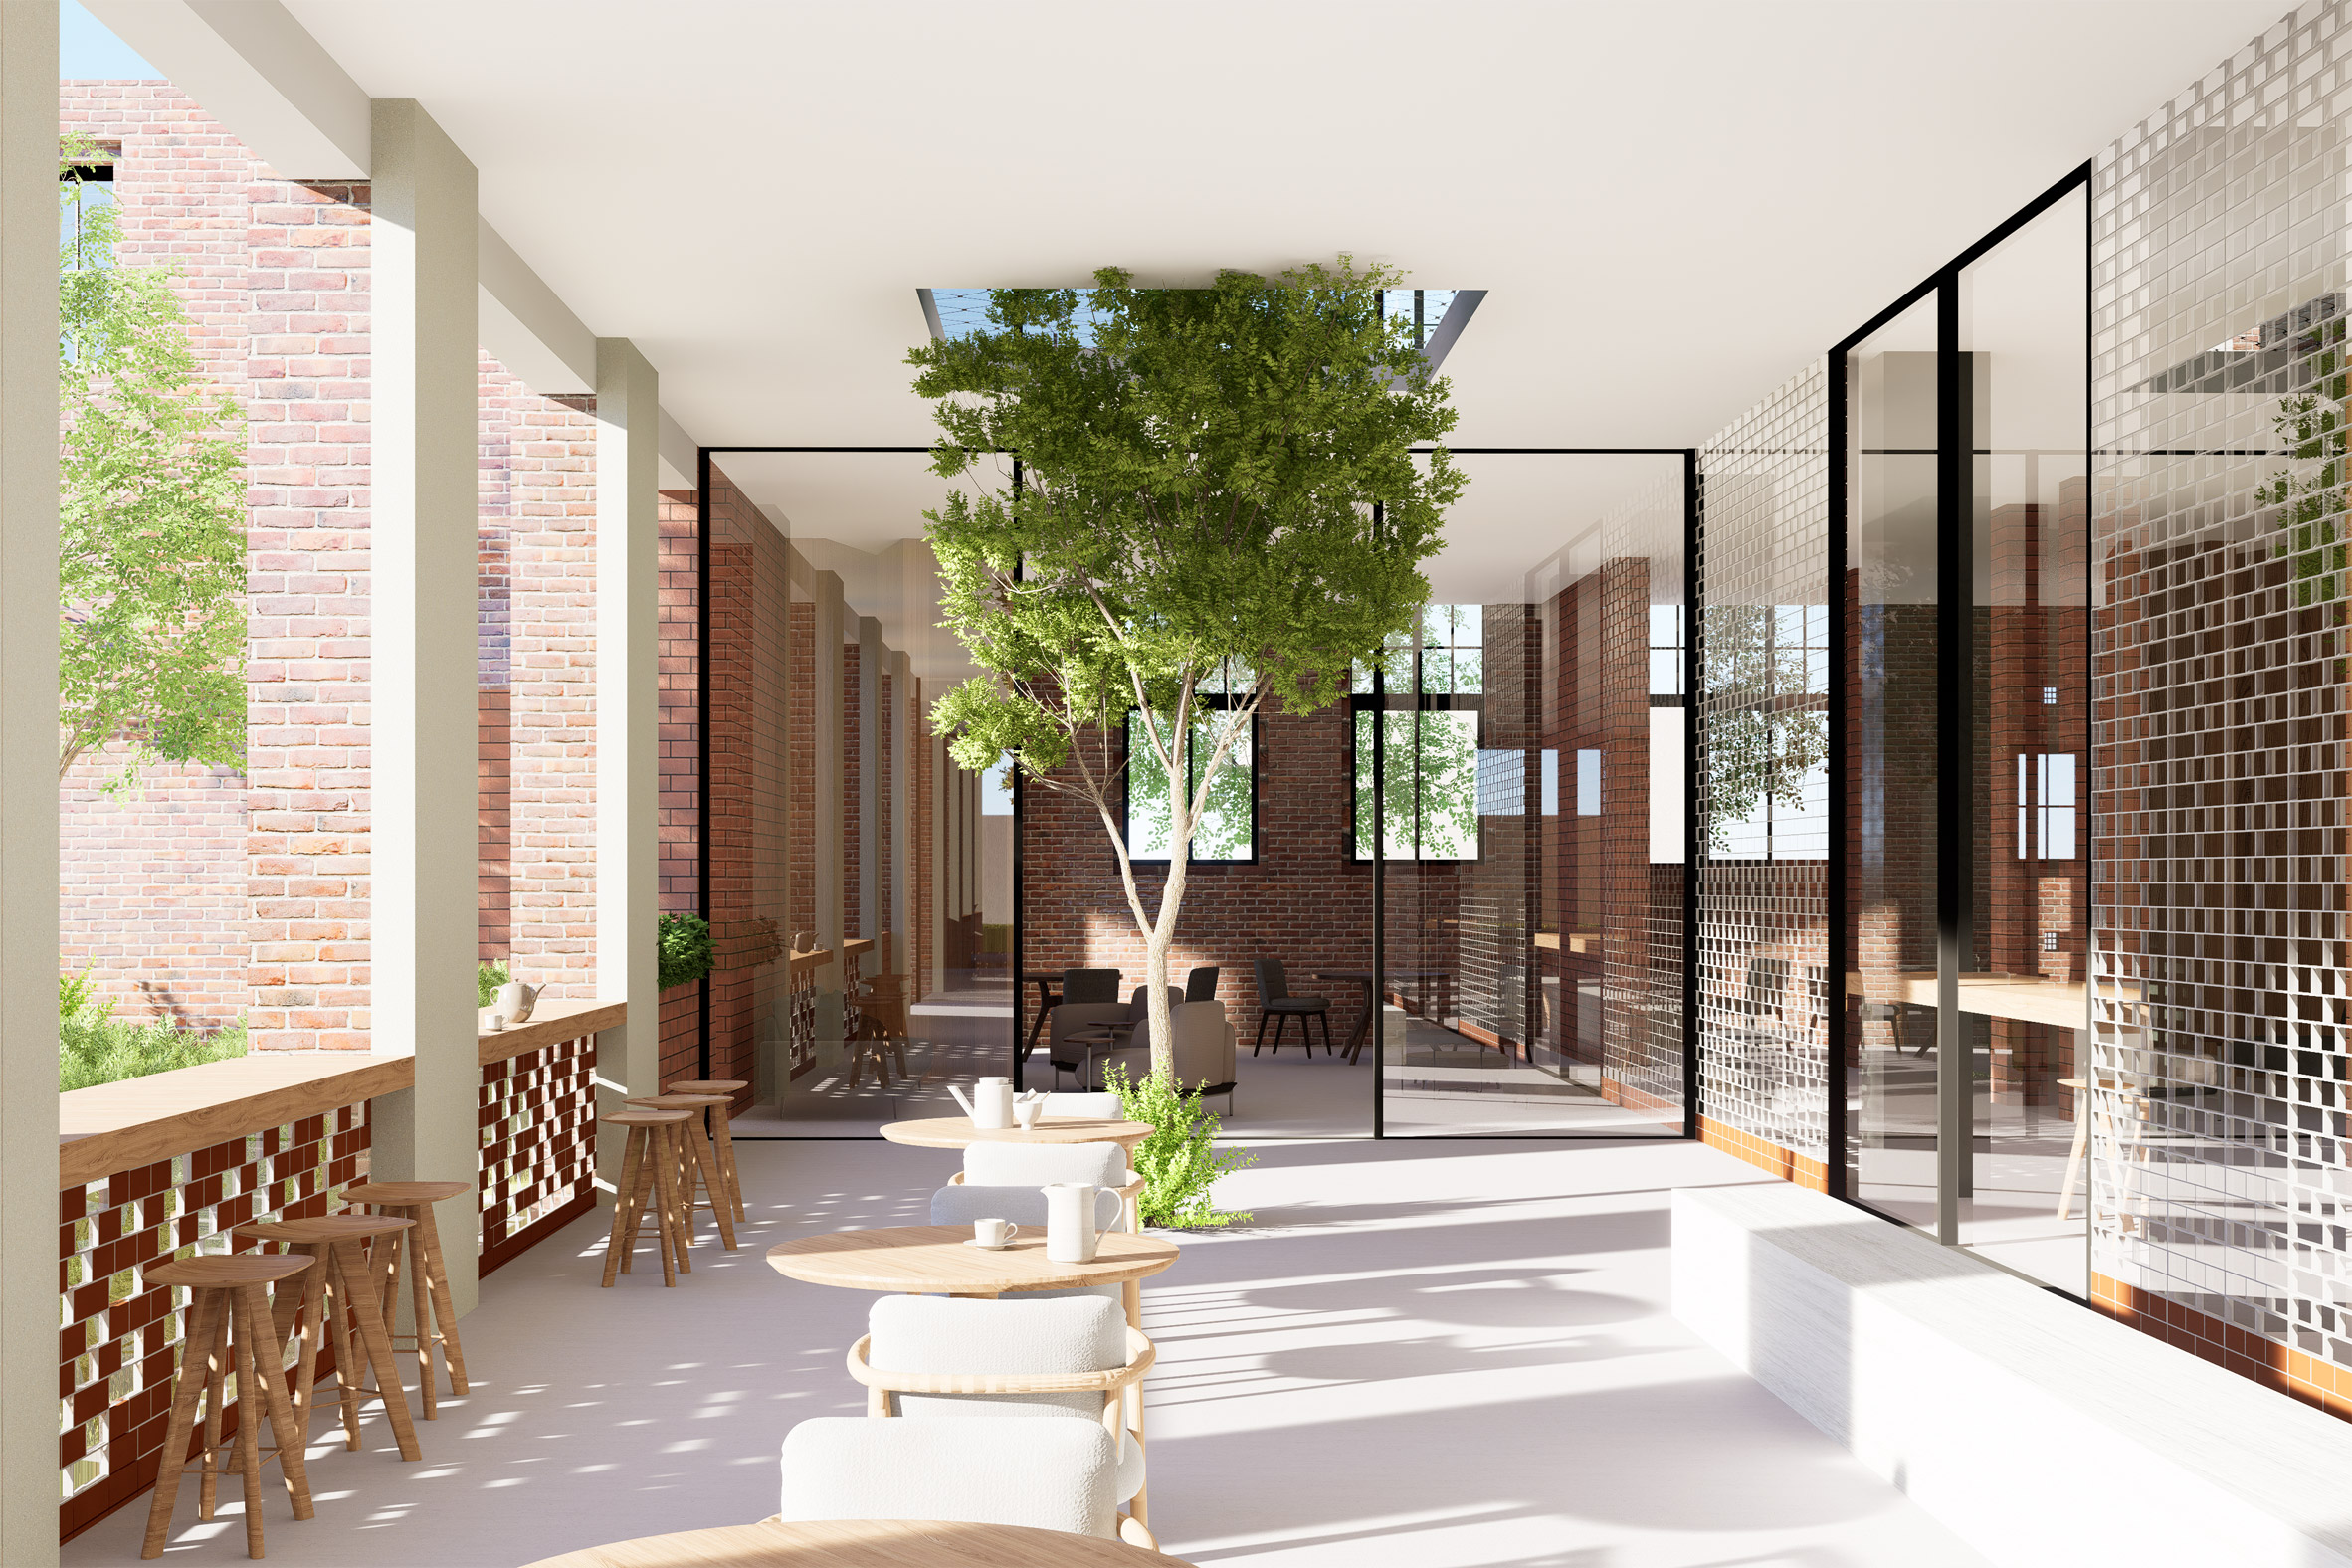 Visualisation showing a terrace area with tree in the centre